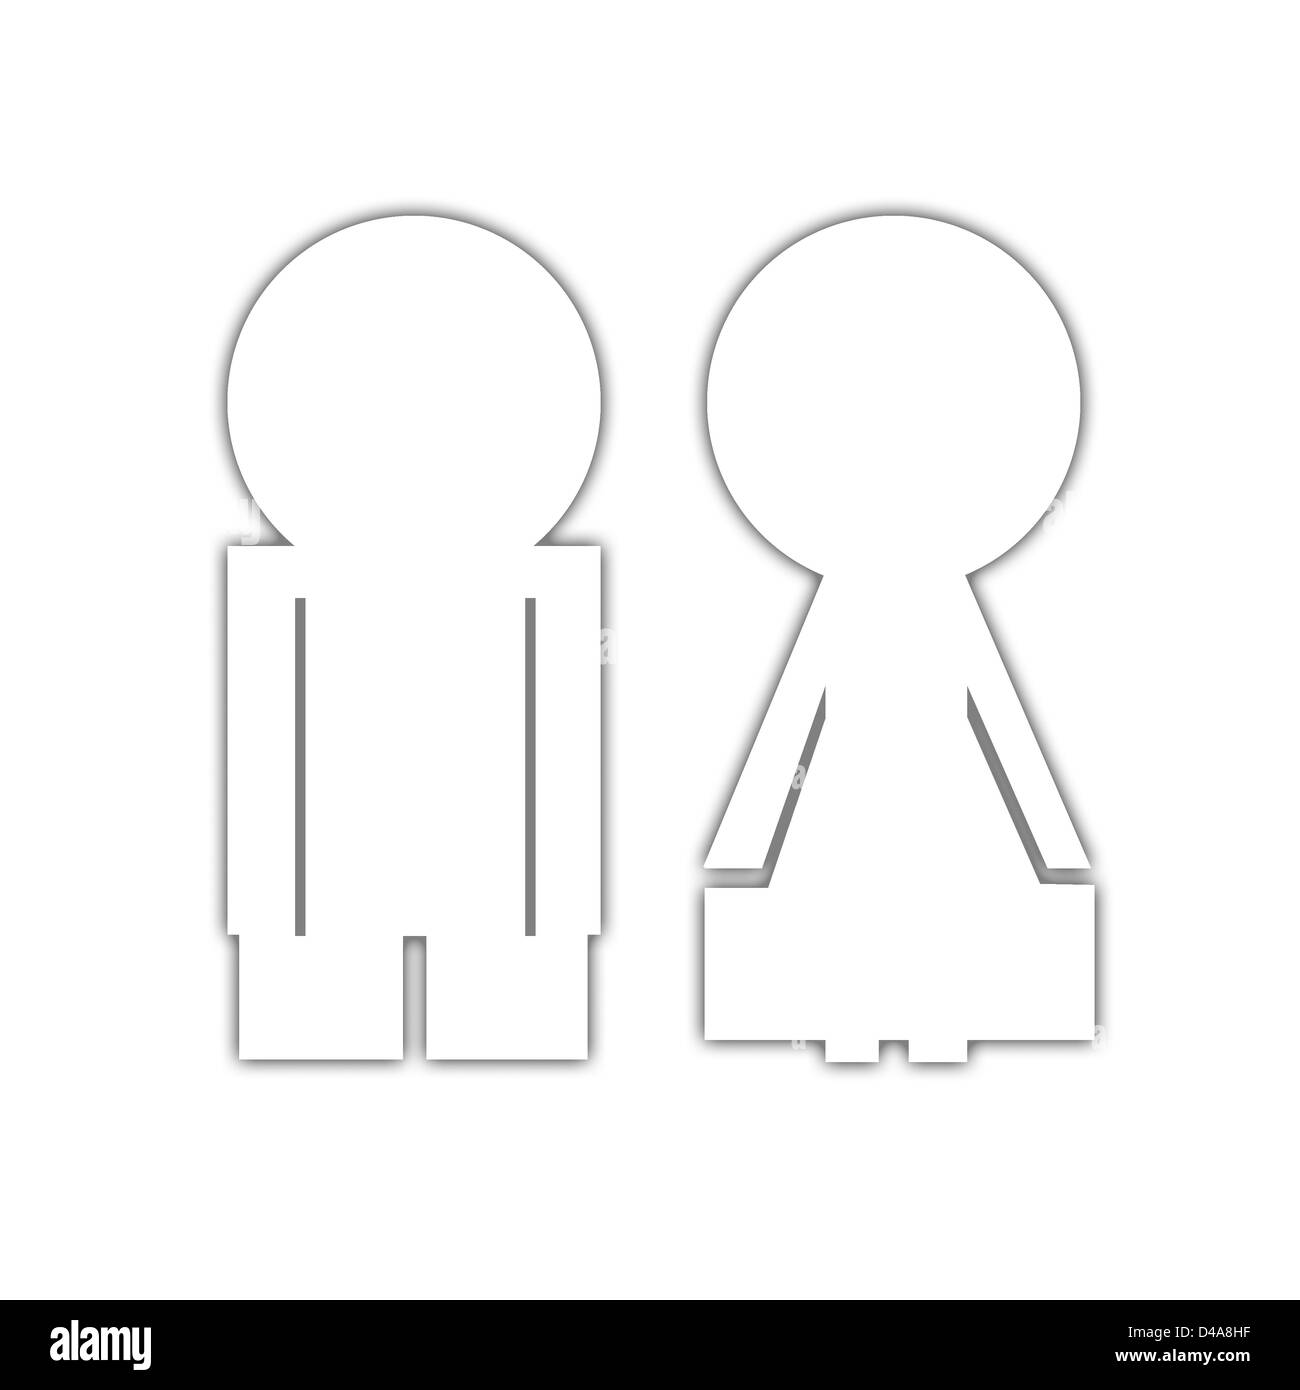 Illustration of a sign man and woman like a toilette sign in white with grey shadows Stock Photo